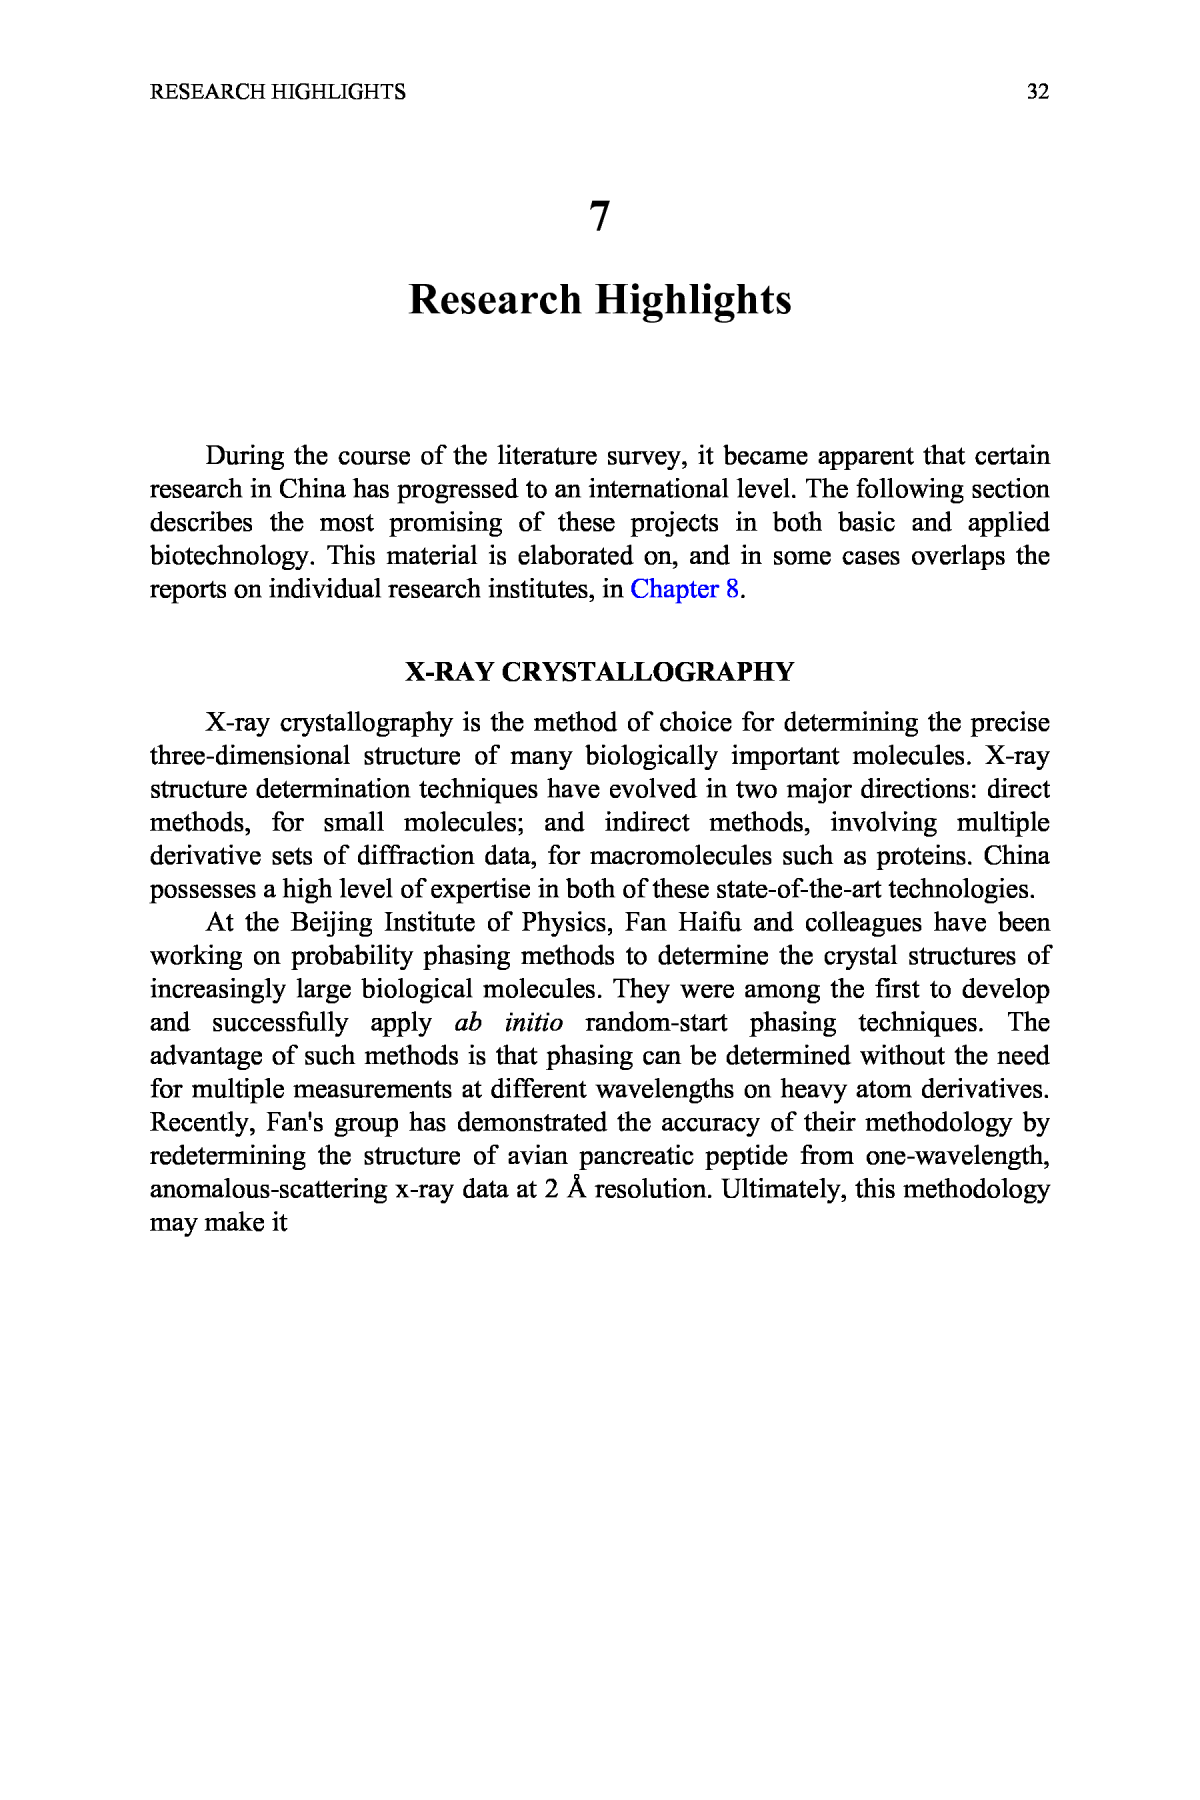 example of highlights in research paper